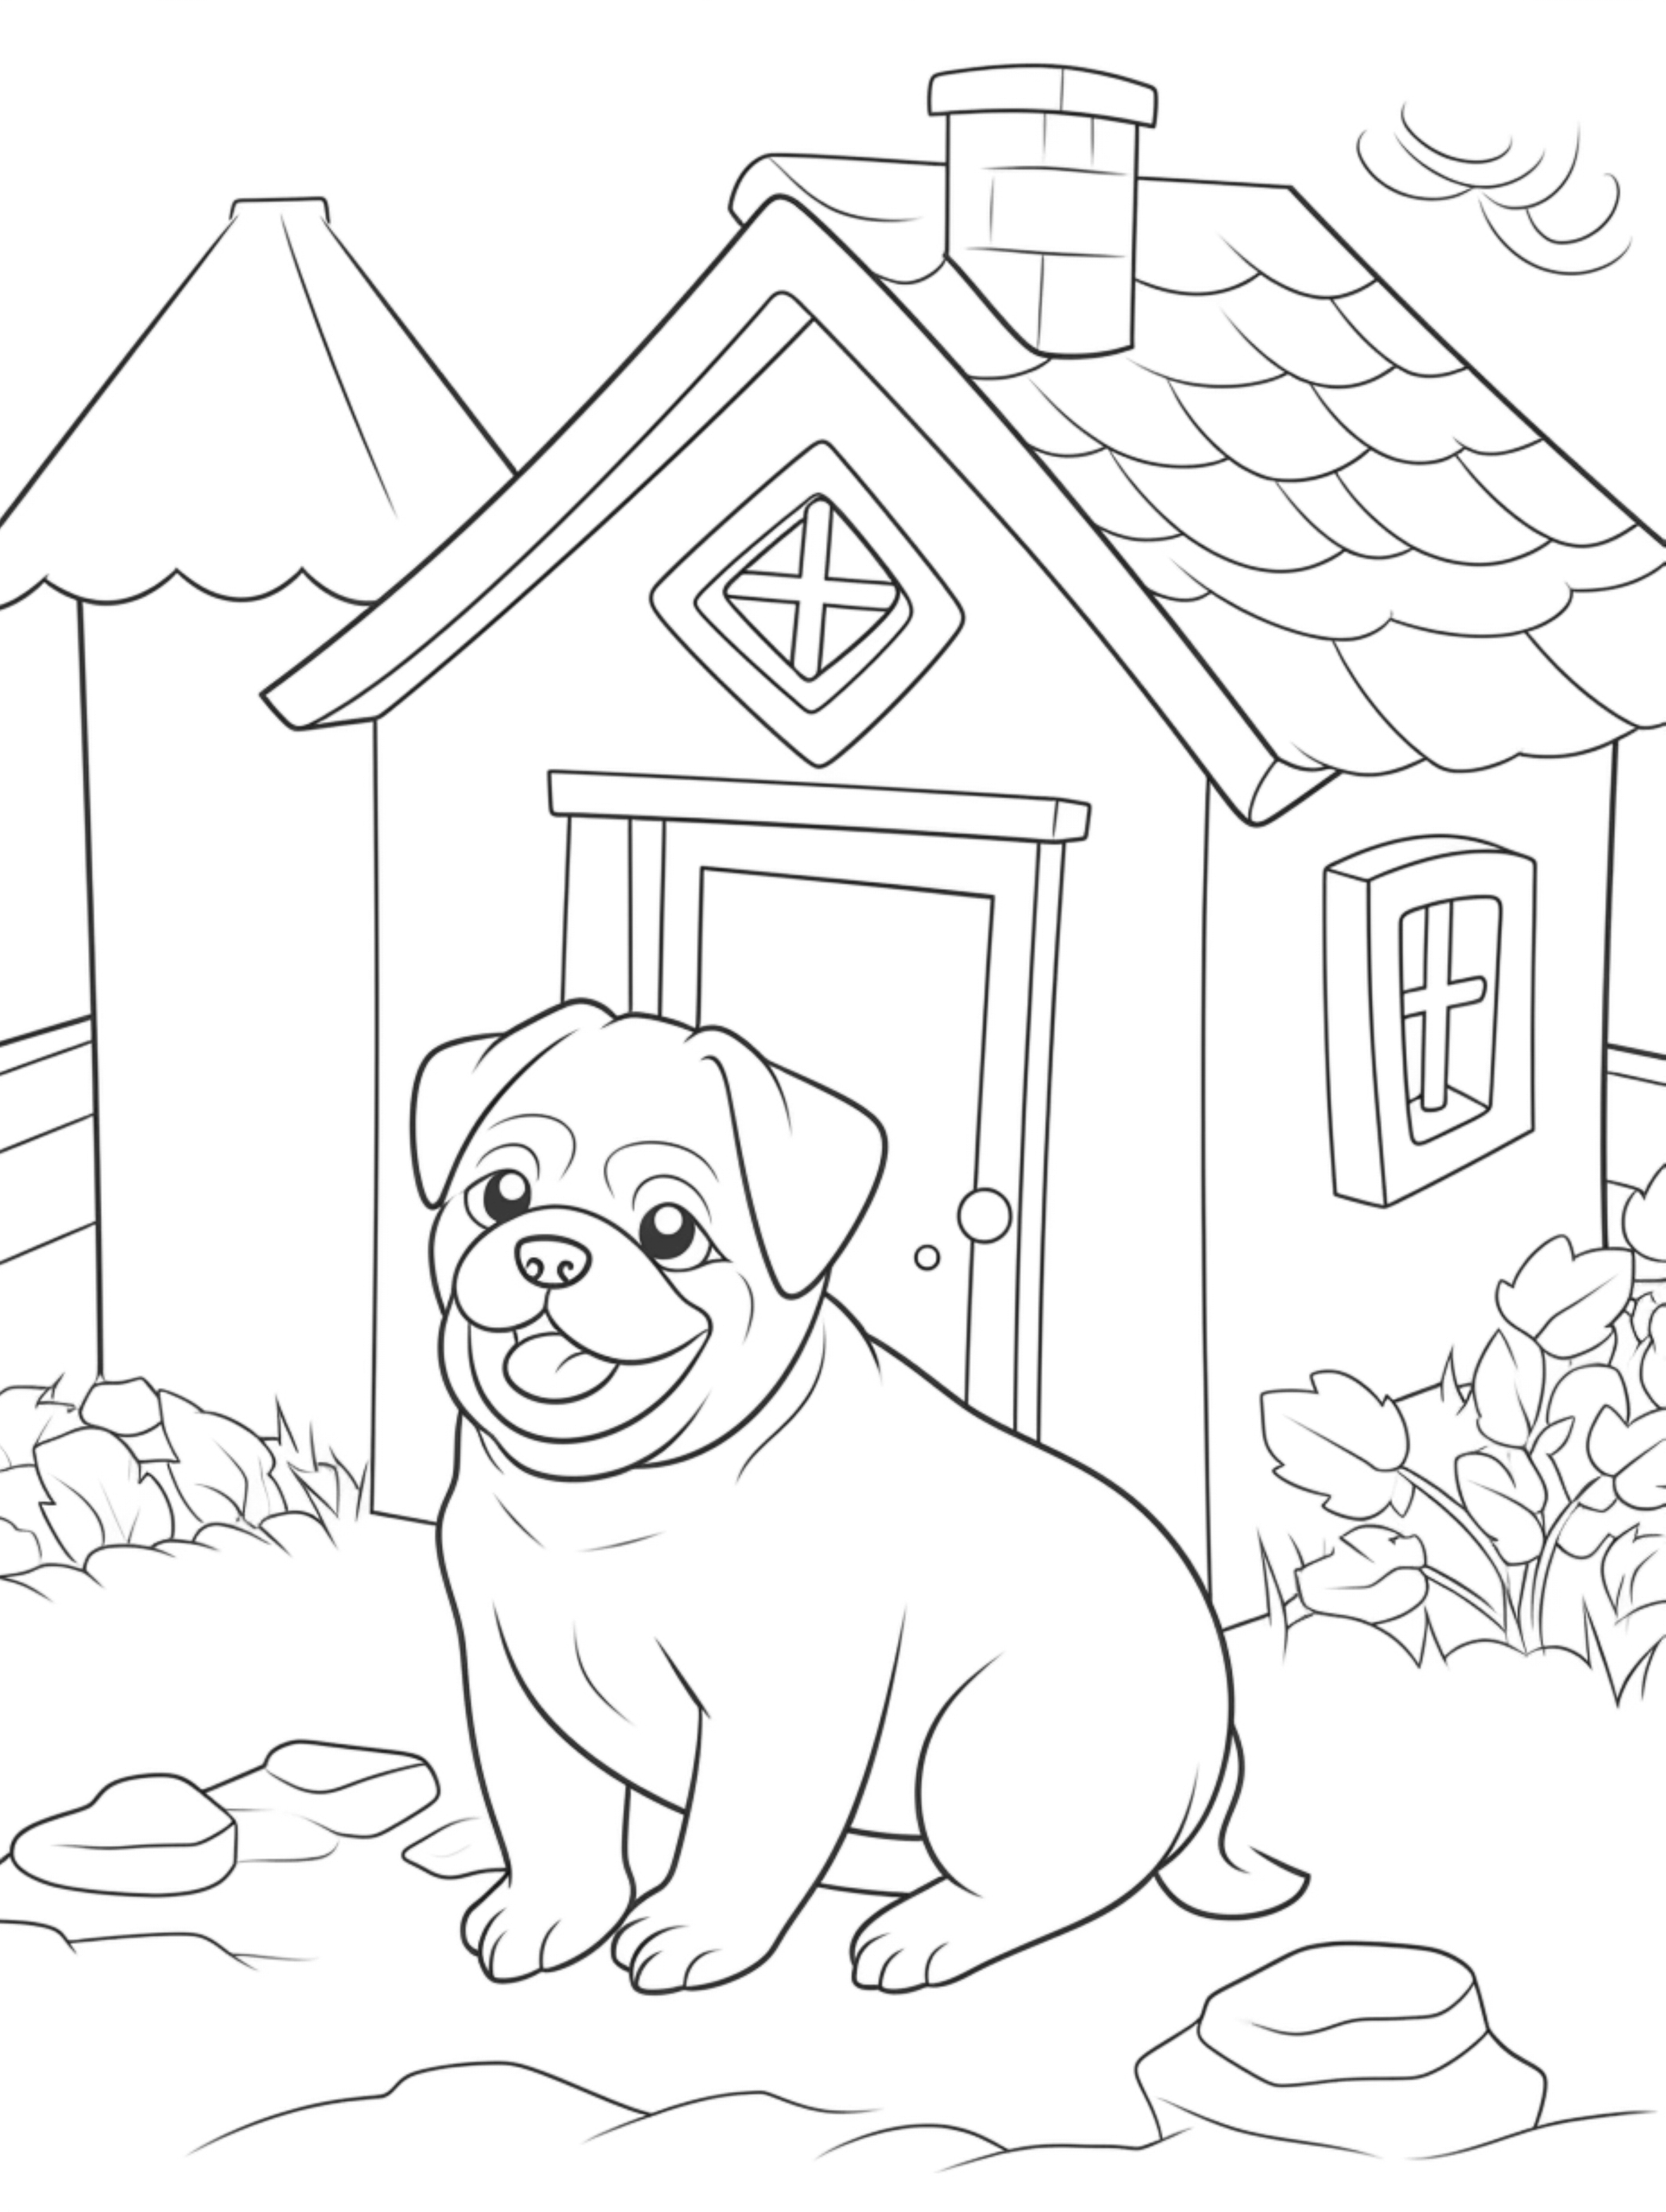 pug coloring page